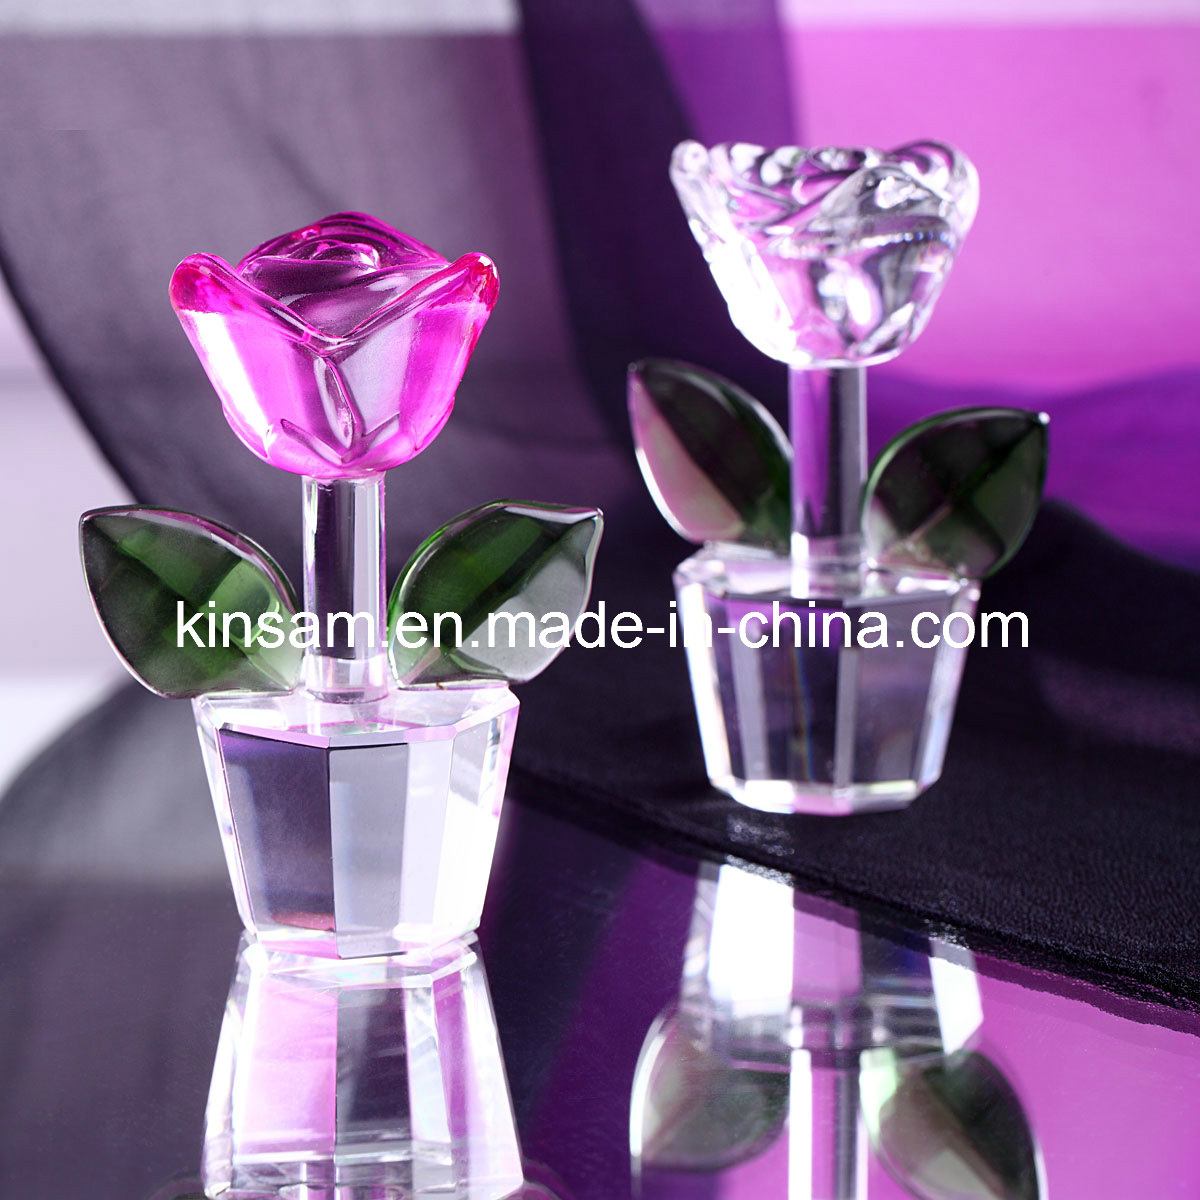 Small Colorful Crystal Flower, Glass Rose for Wedding Favors (KS19016)